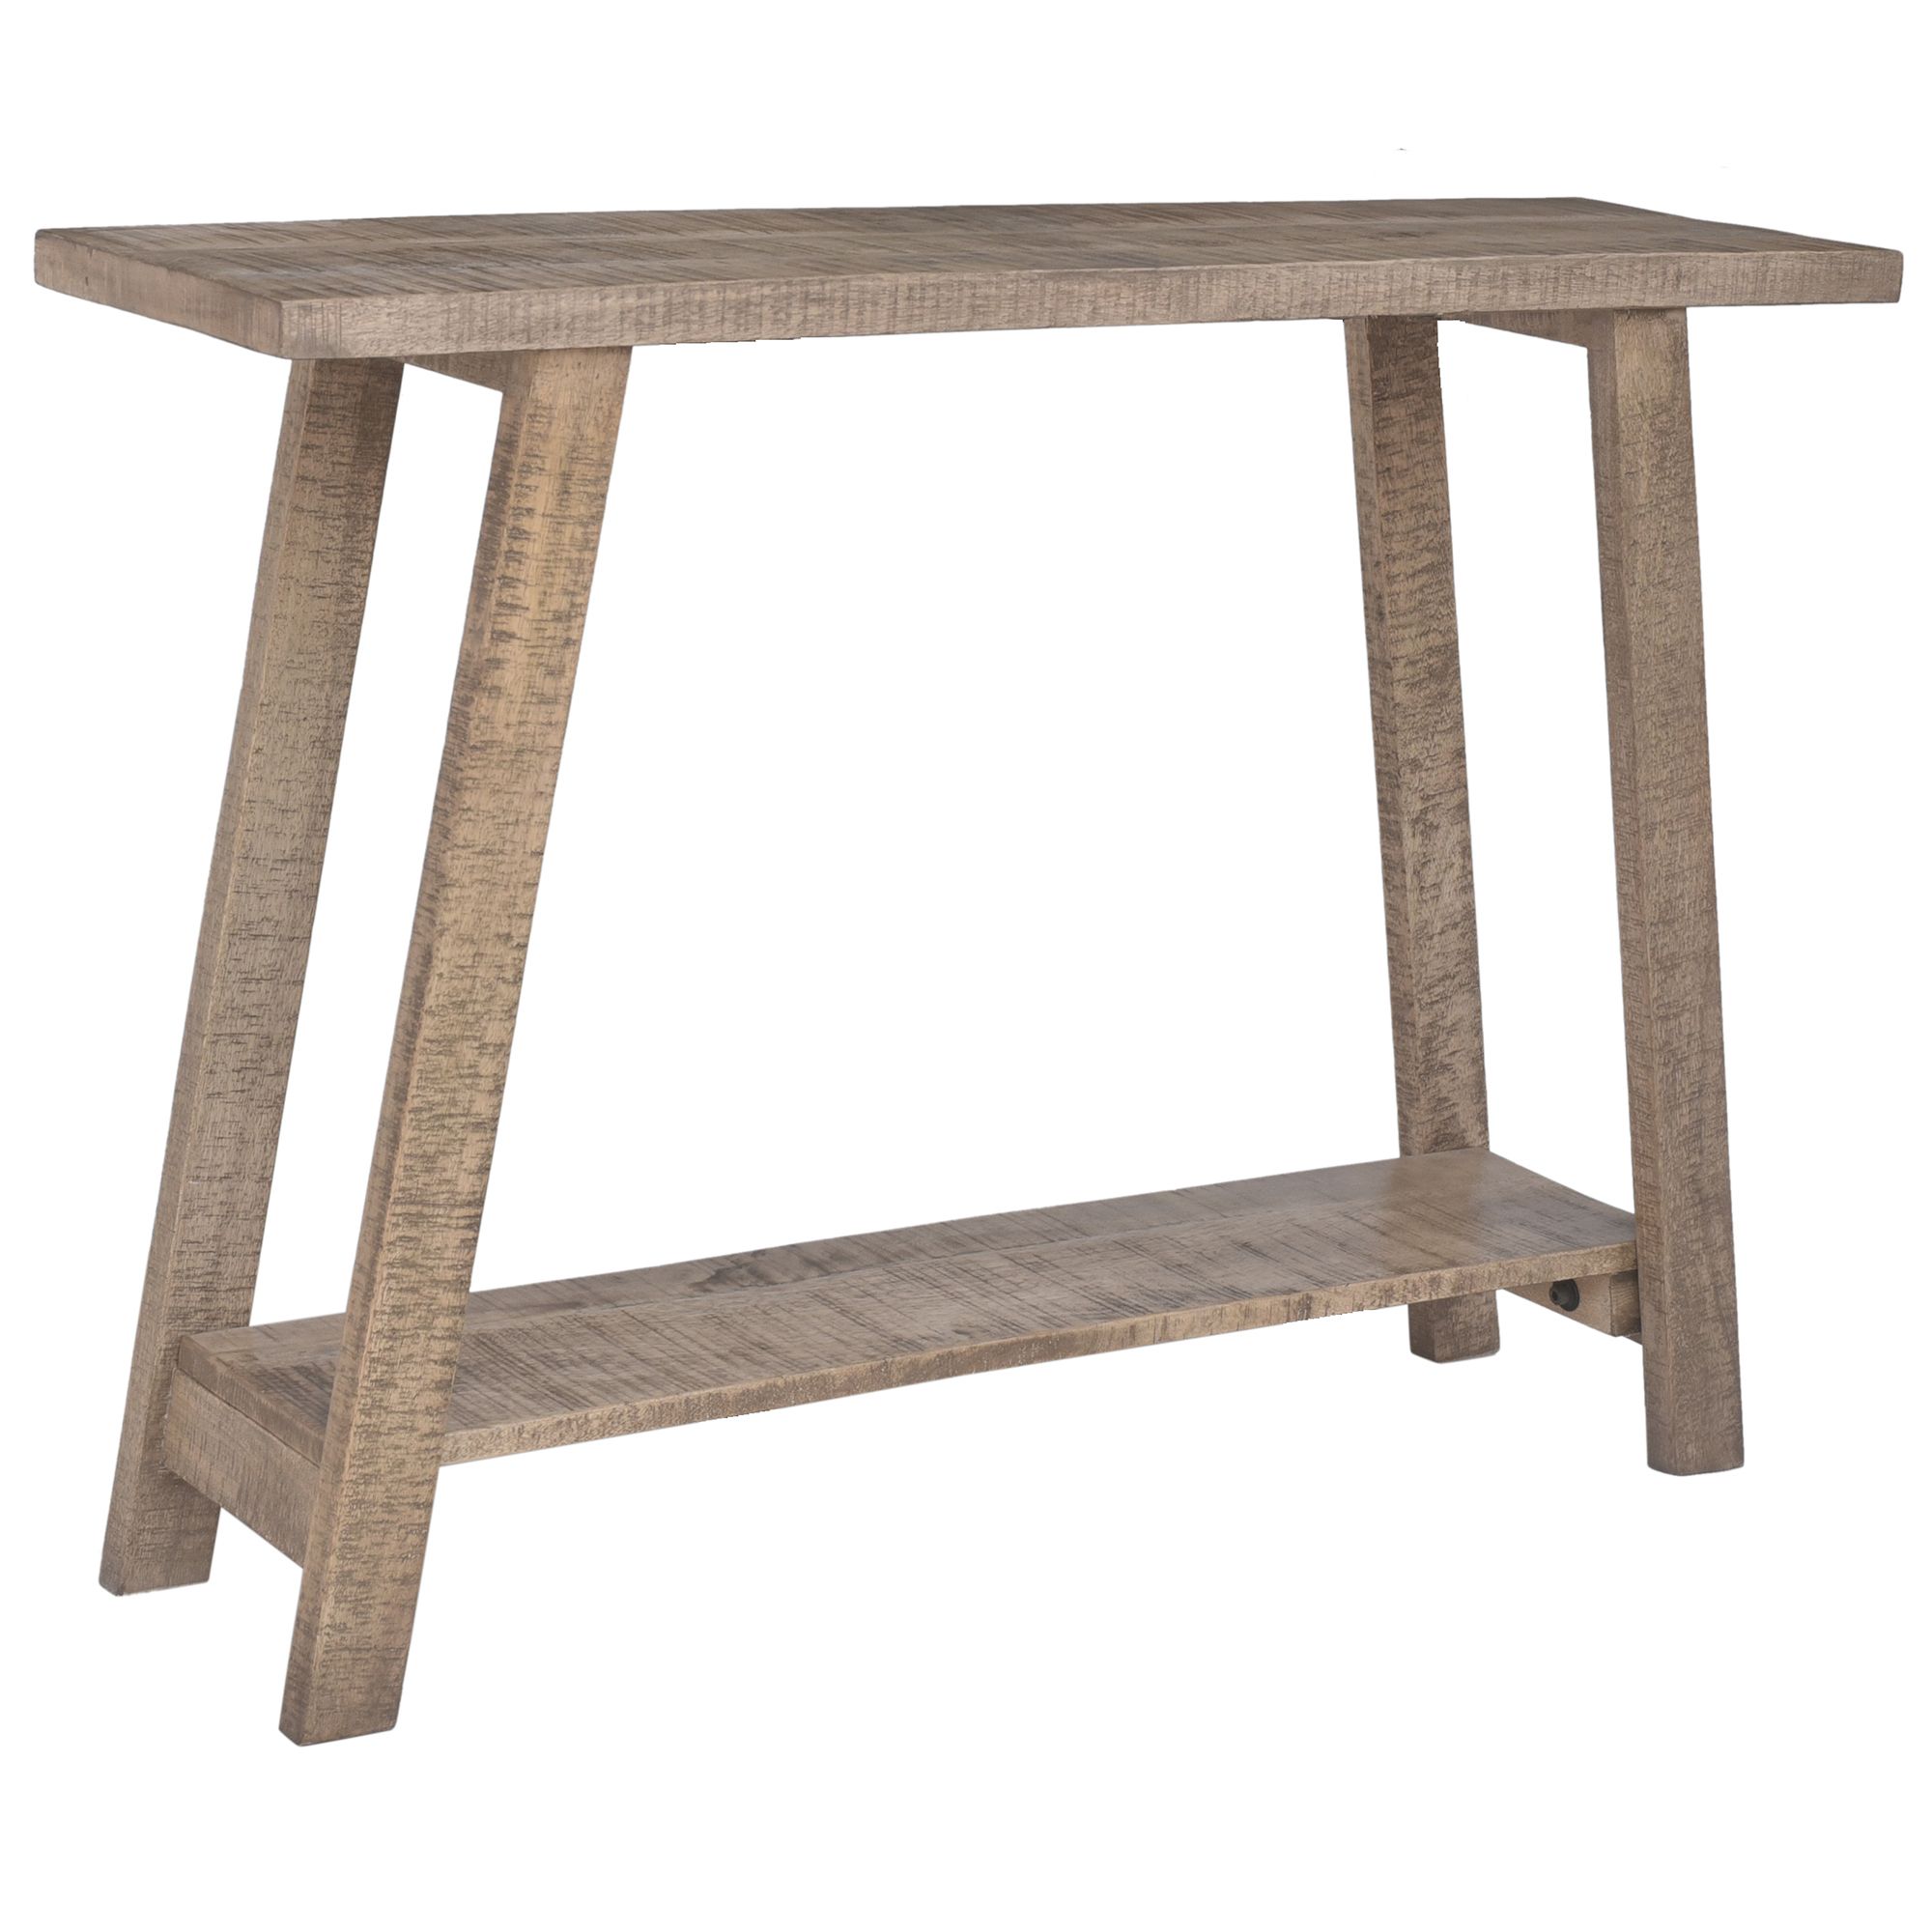 Rustic Modern Solid Wood Console Table – Walmart – Walmart Throughout Natural Wood Console Tables (View 13 of 20)